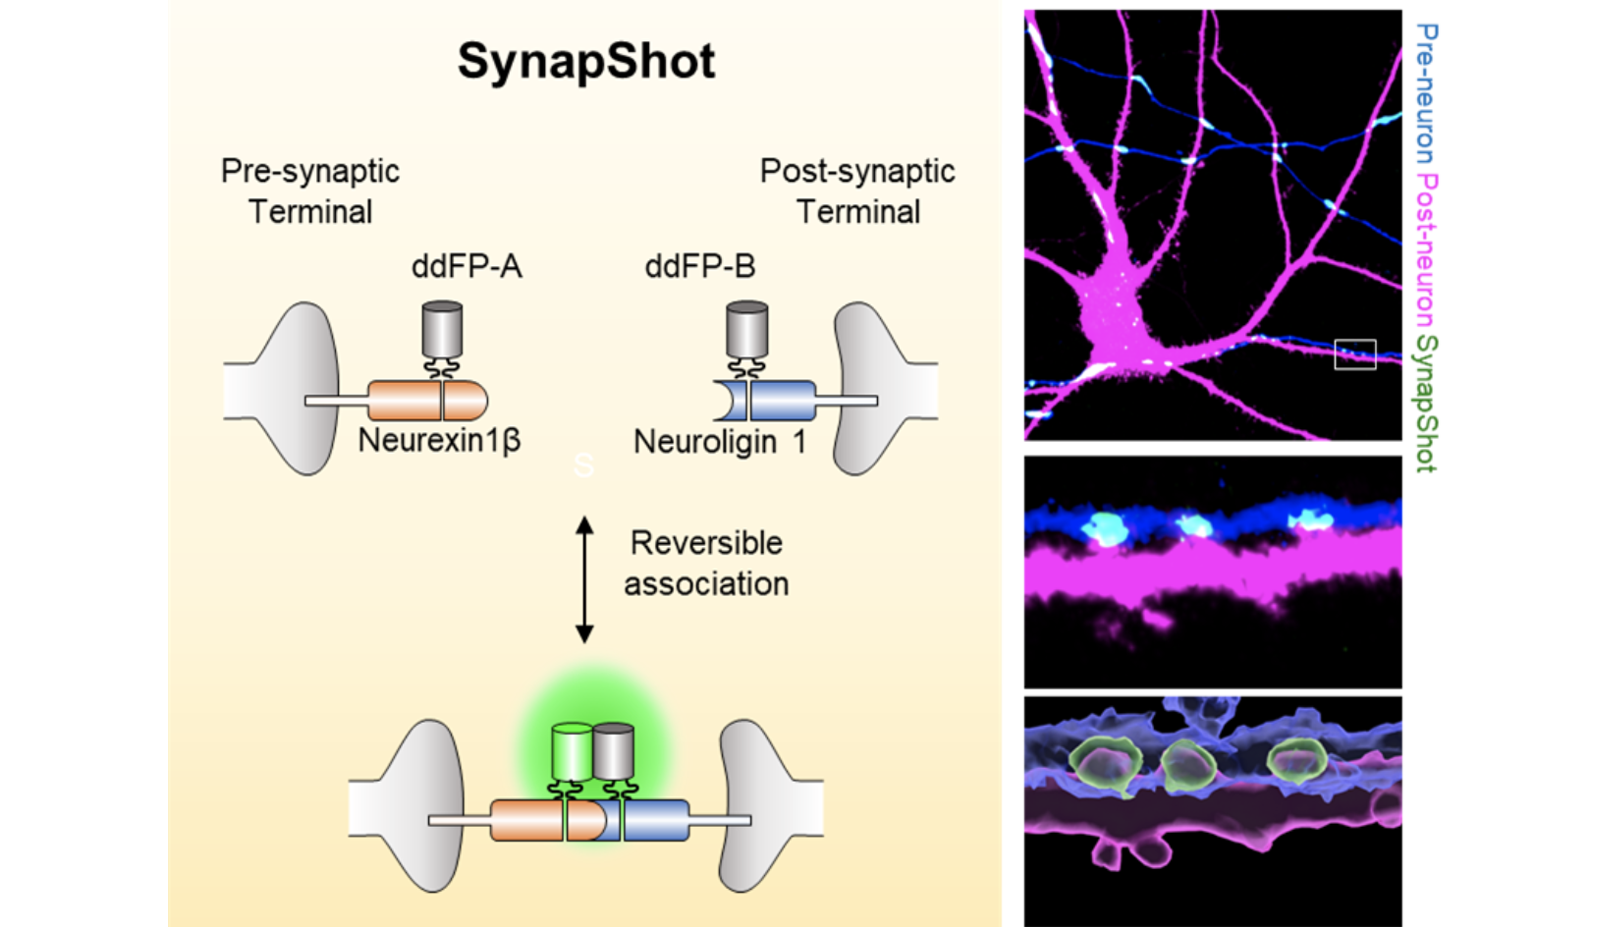 Figure 1. Design and expression of SynapShot